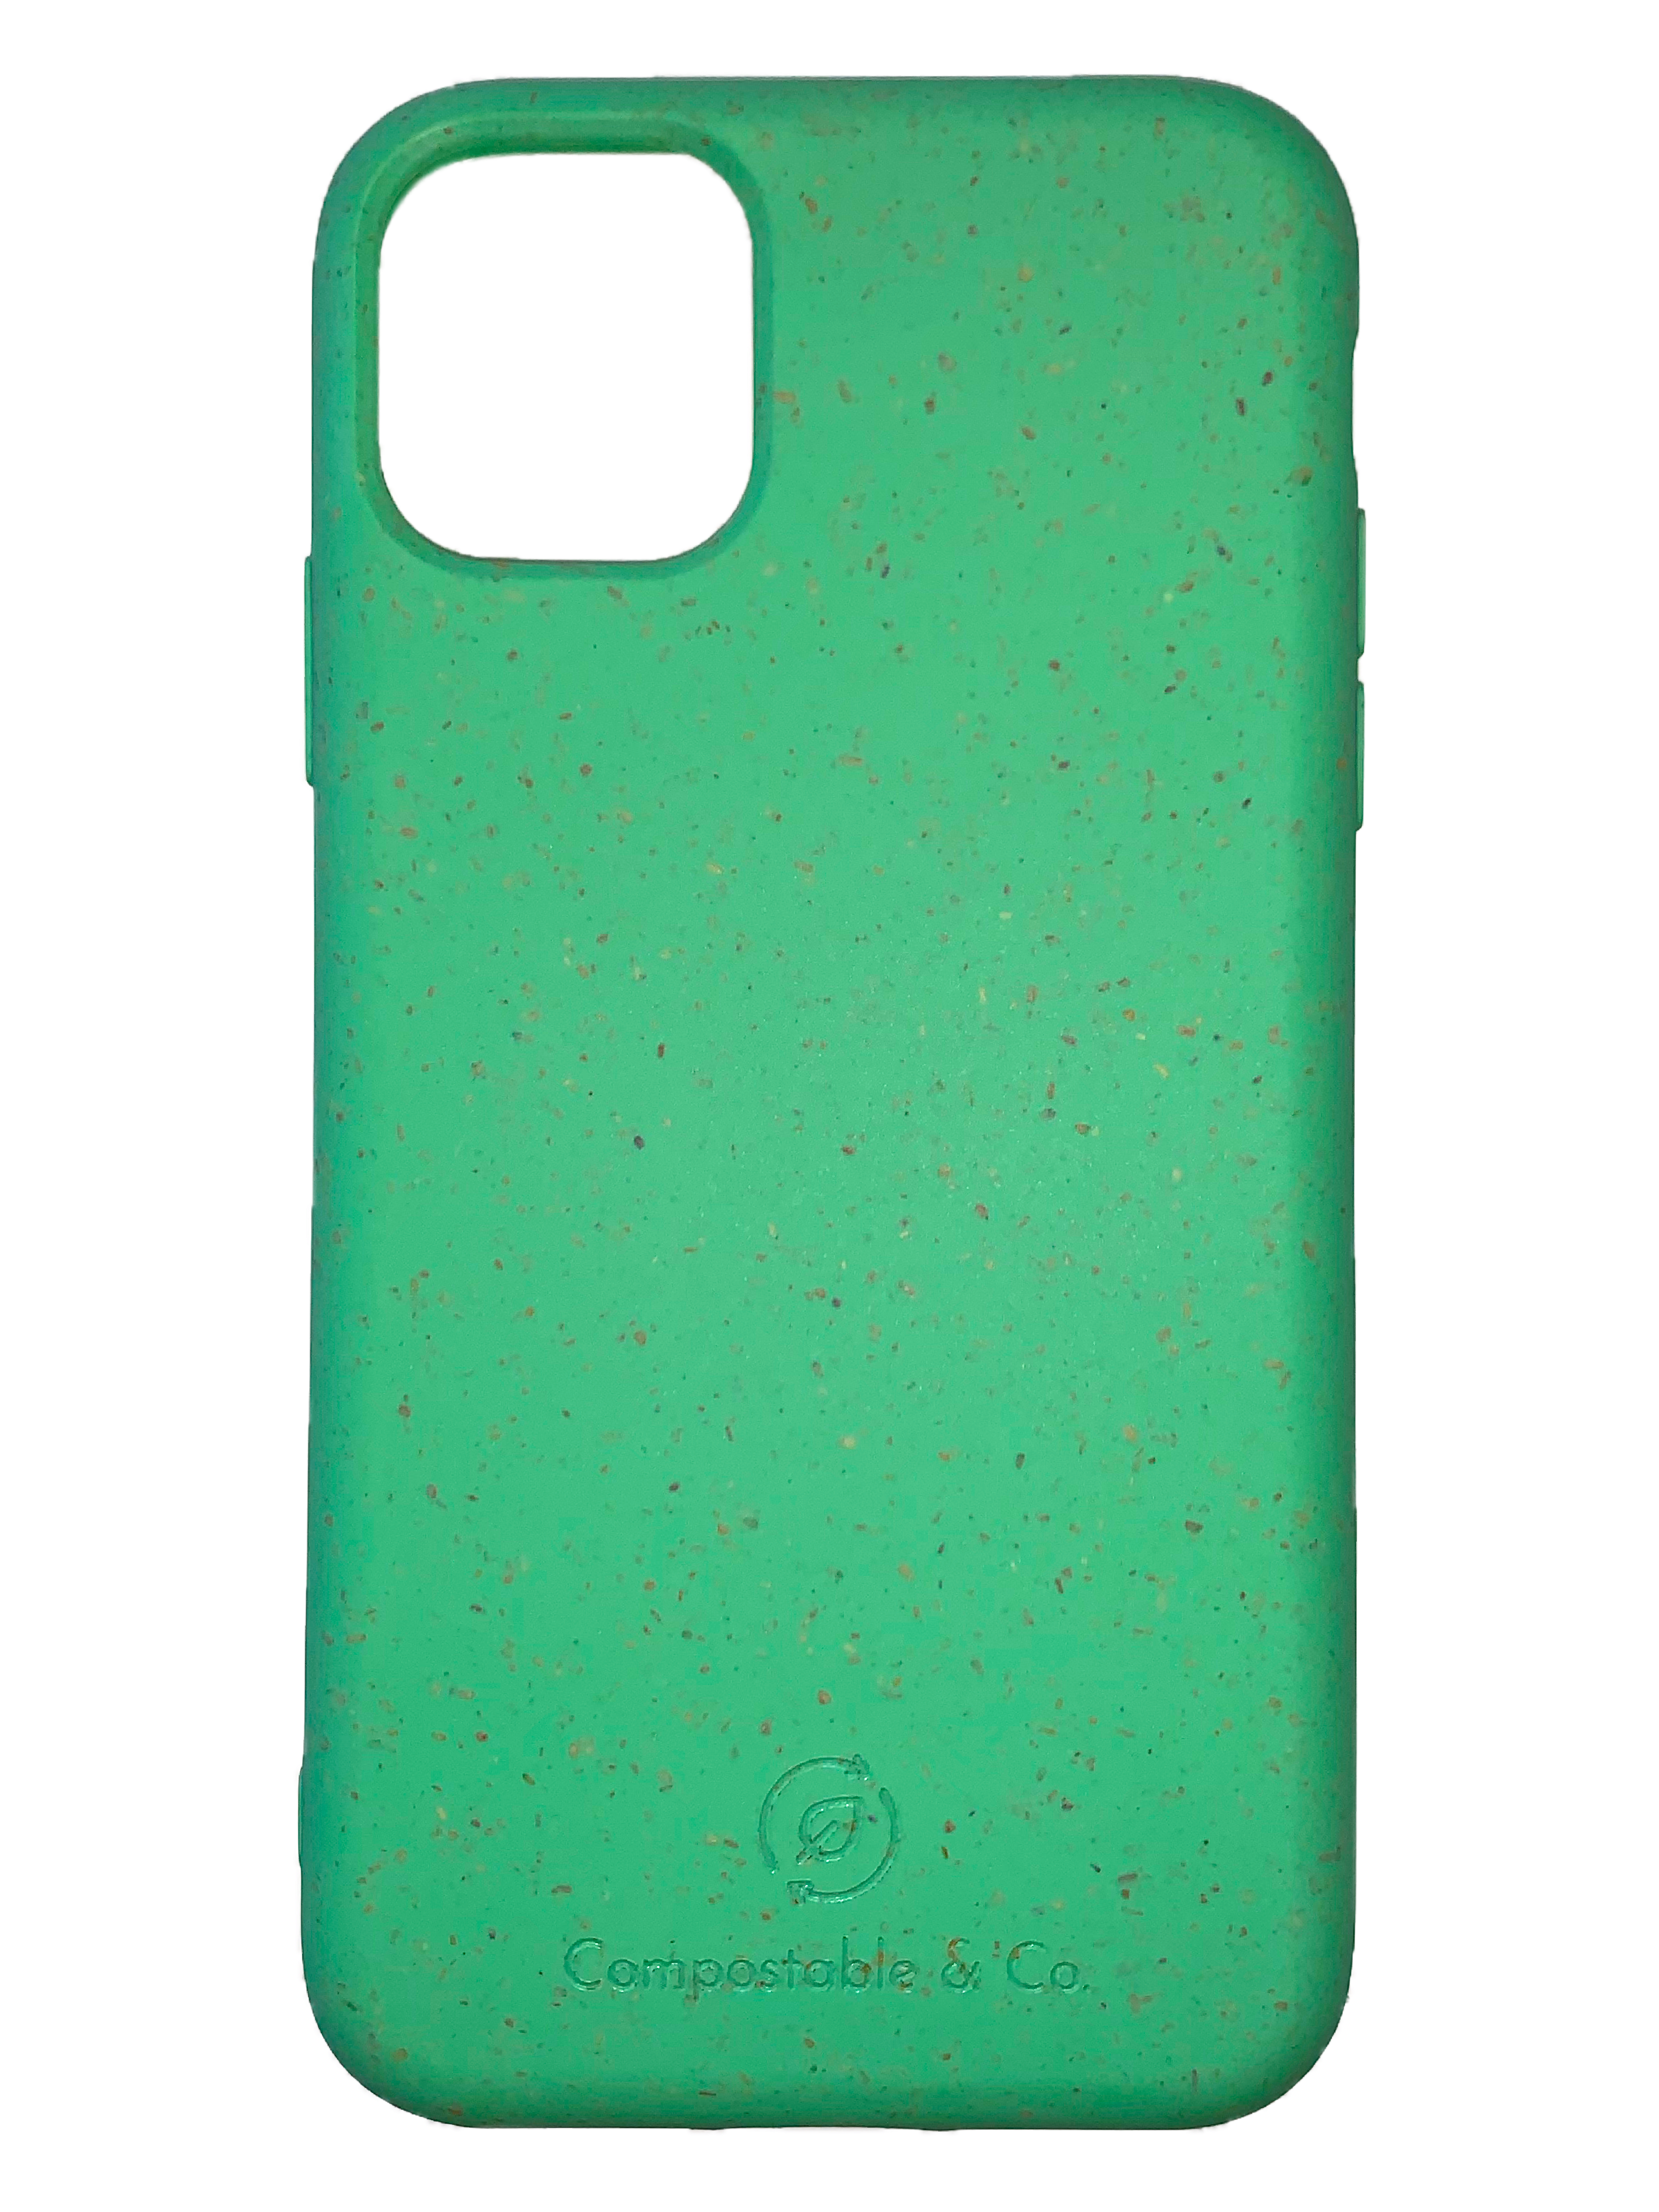 Compostable & Co. iPhone 11 green biodegradable phone case